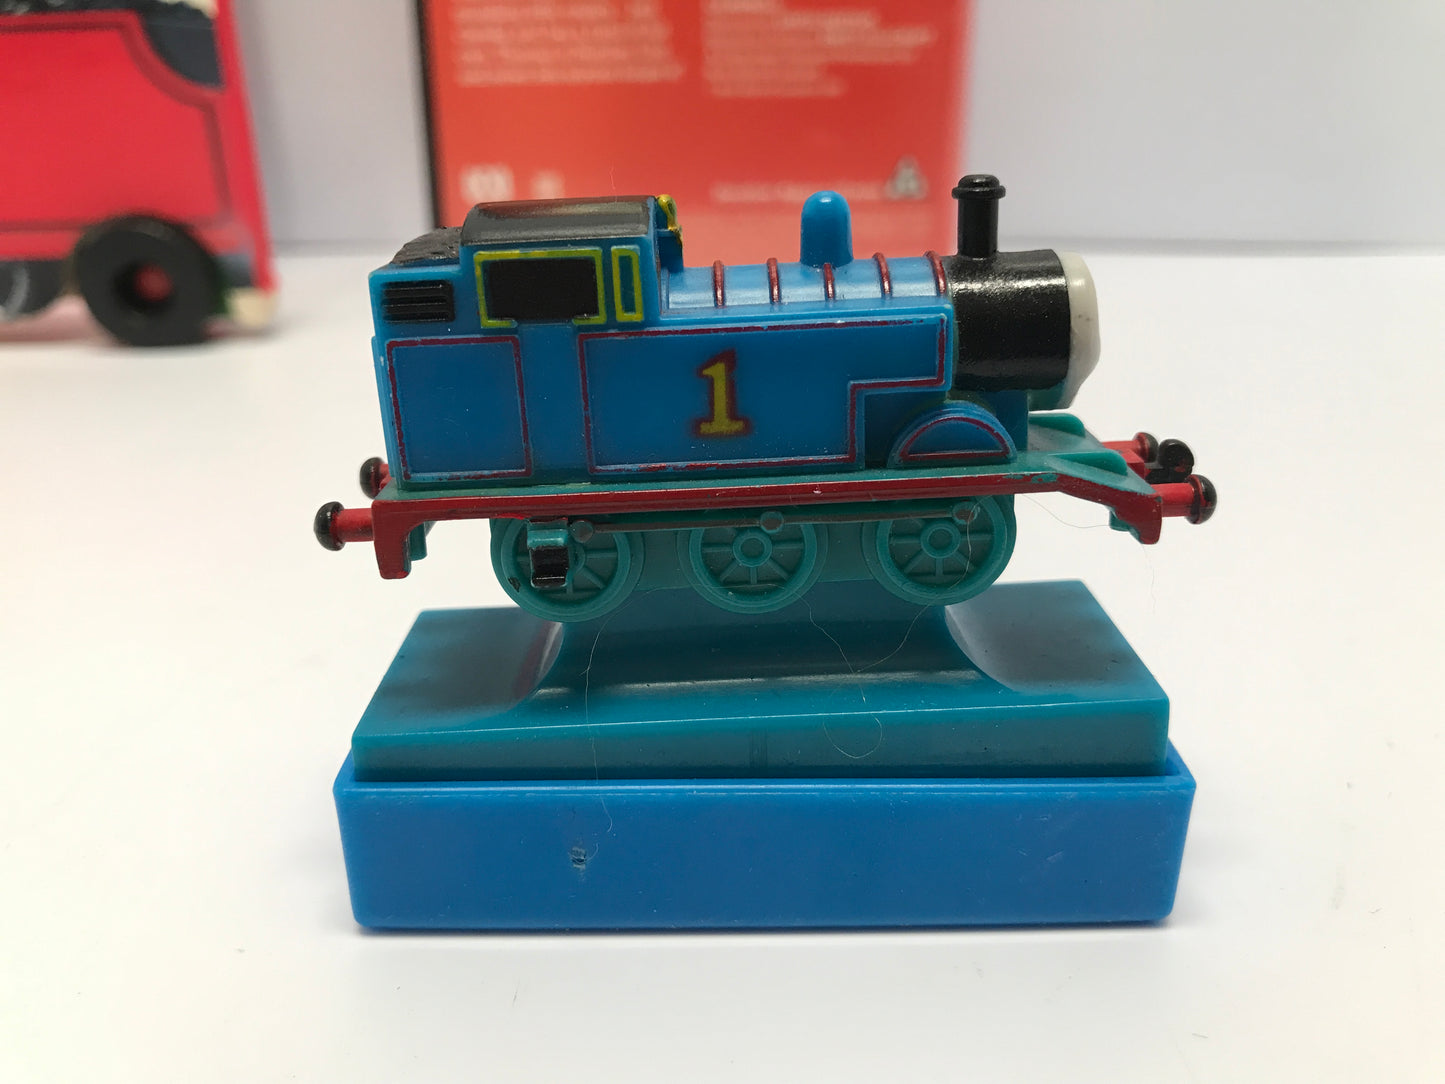 1980's Vintage Thomas The Tank Engine With Ringo Starr Original VHS Movie And Bored Book With Train Stamp